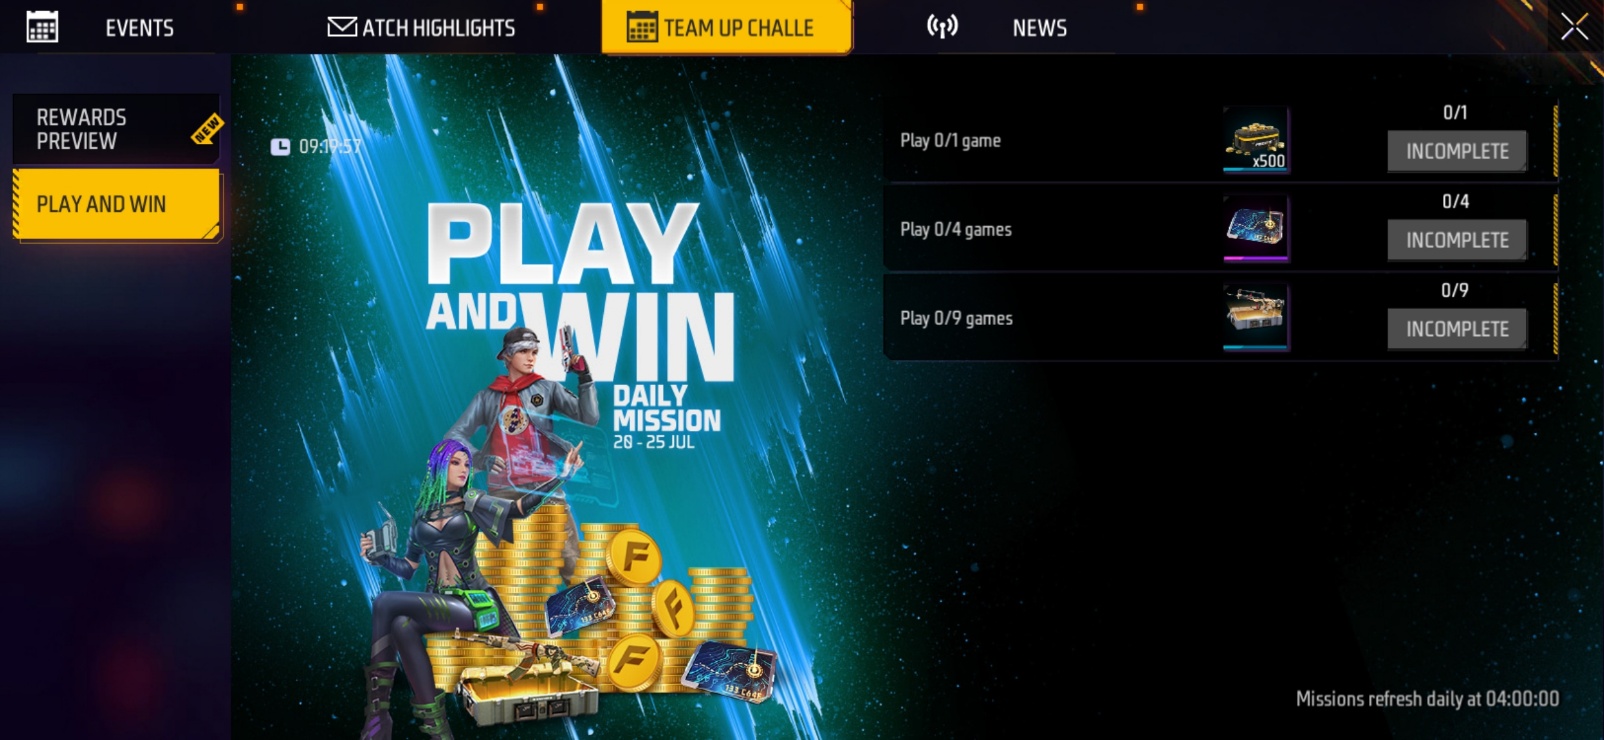 Play Free Fire And Win Rewards